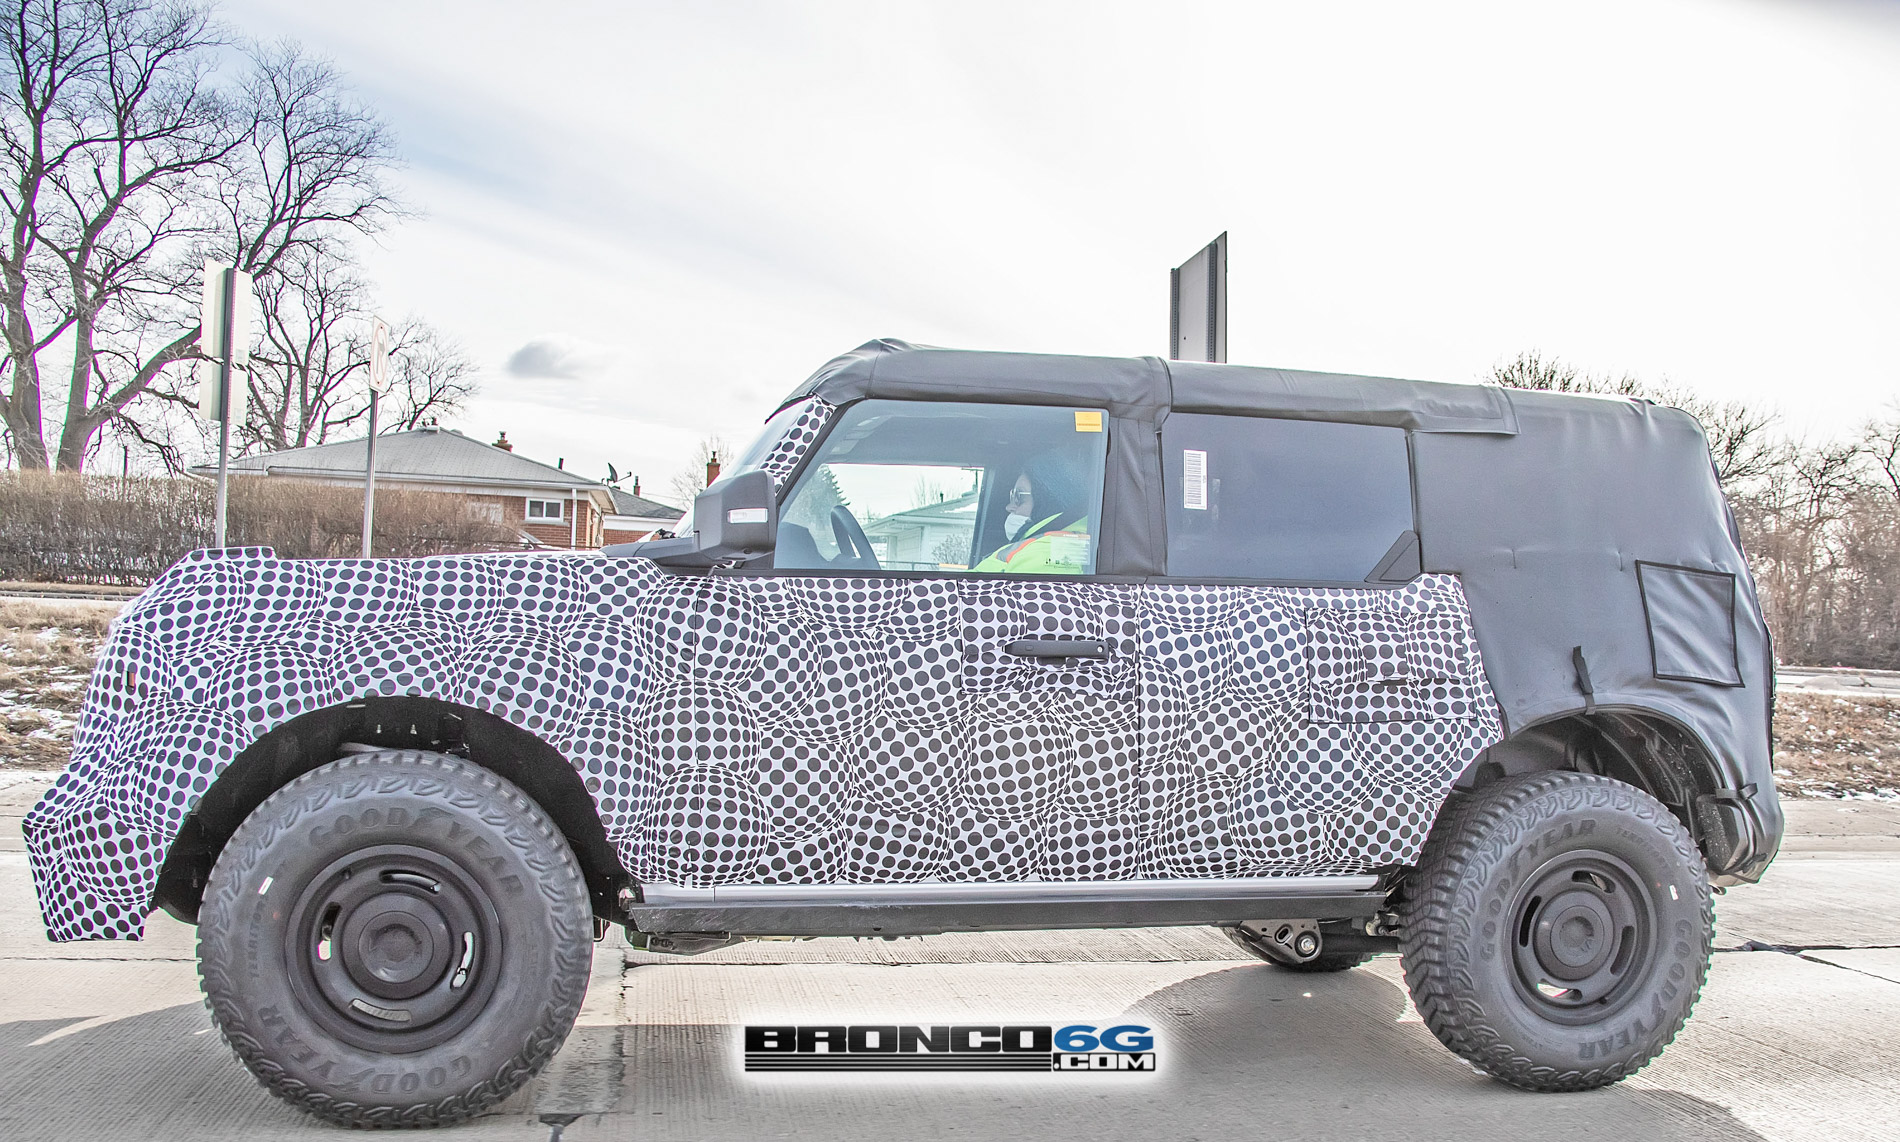 Ford Bronco HERITAGE EDITION Bronco Spied! Riding on 35's, Classic 4-Slot Wheel Design and White Grille! 1612292388651